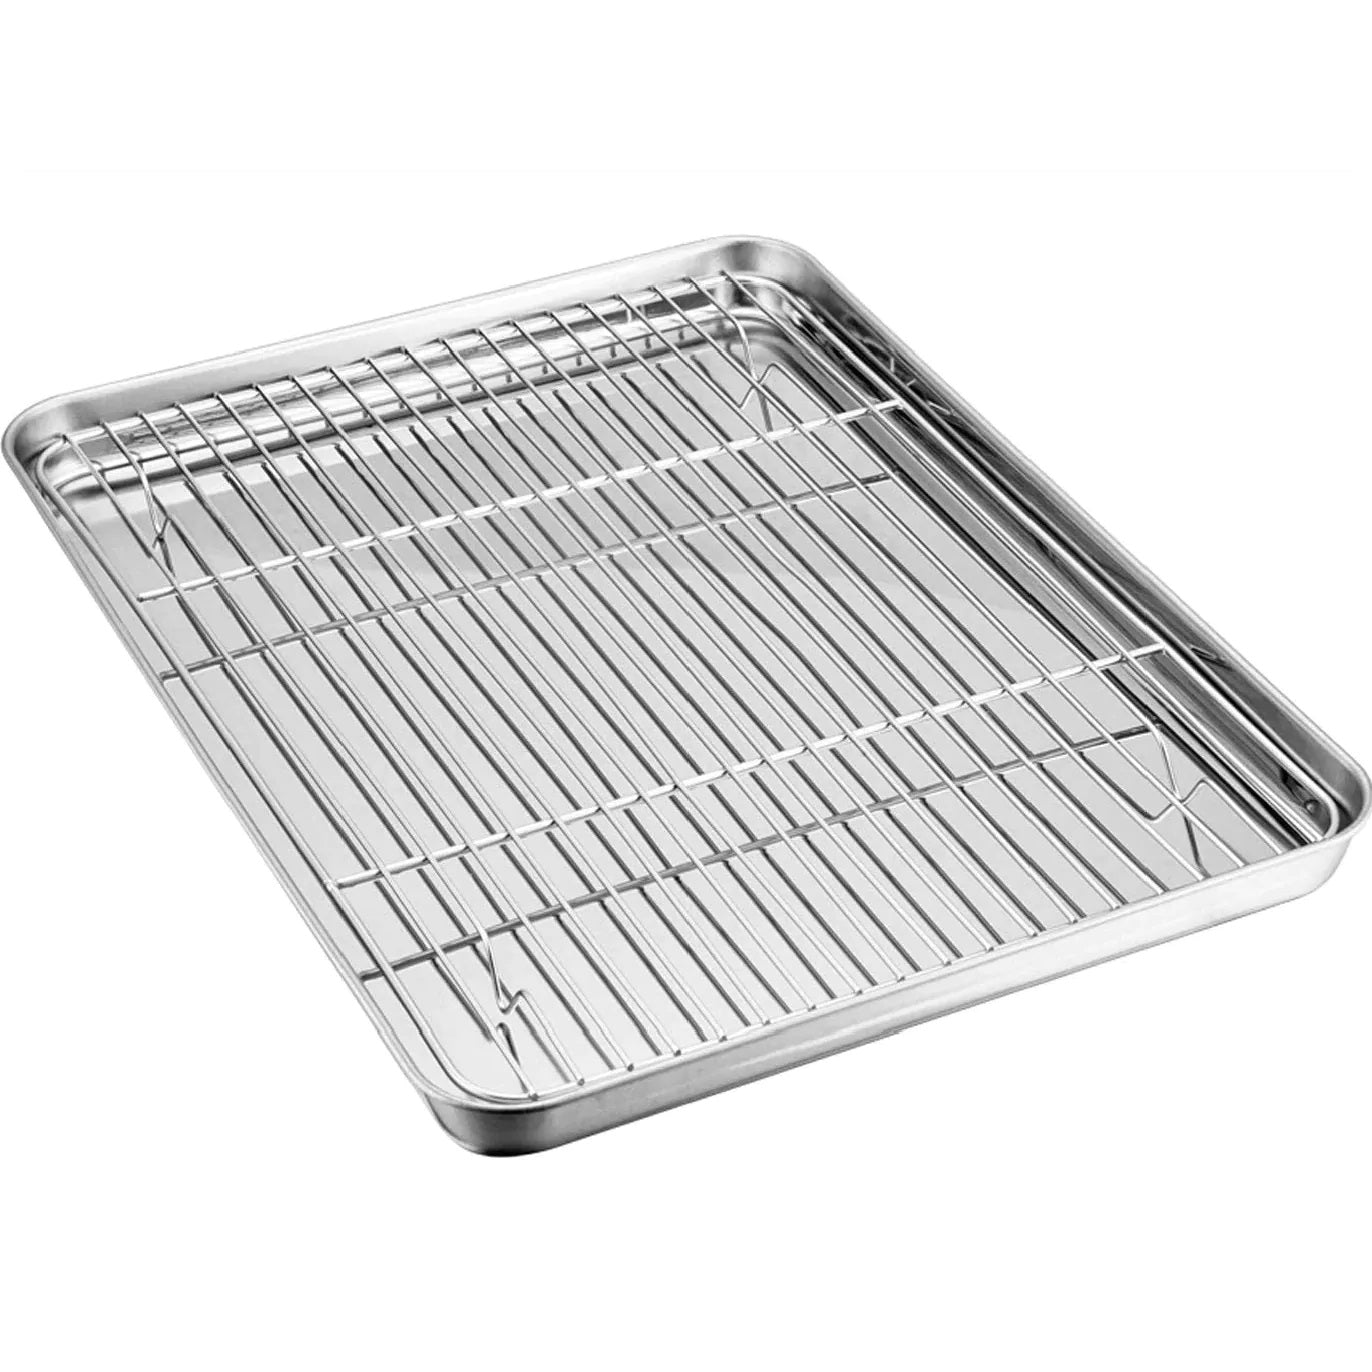 16x12 Baking Cookie Sheet with FREE Rack for Cooling Baking